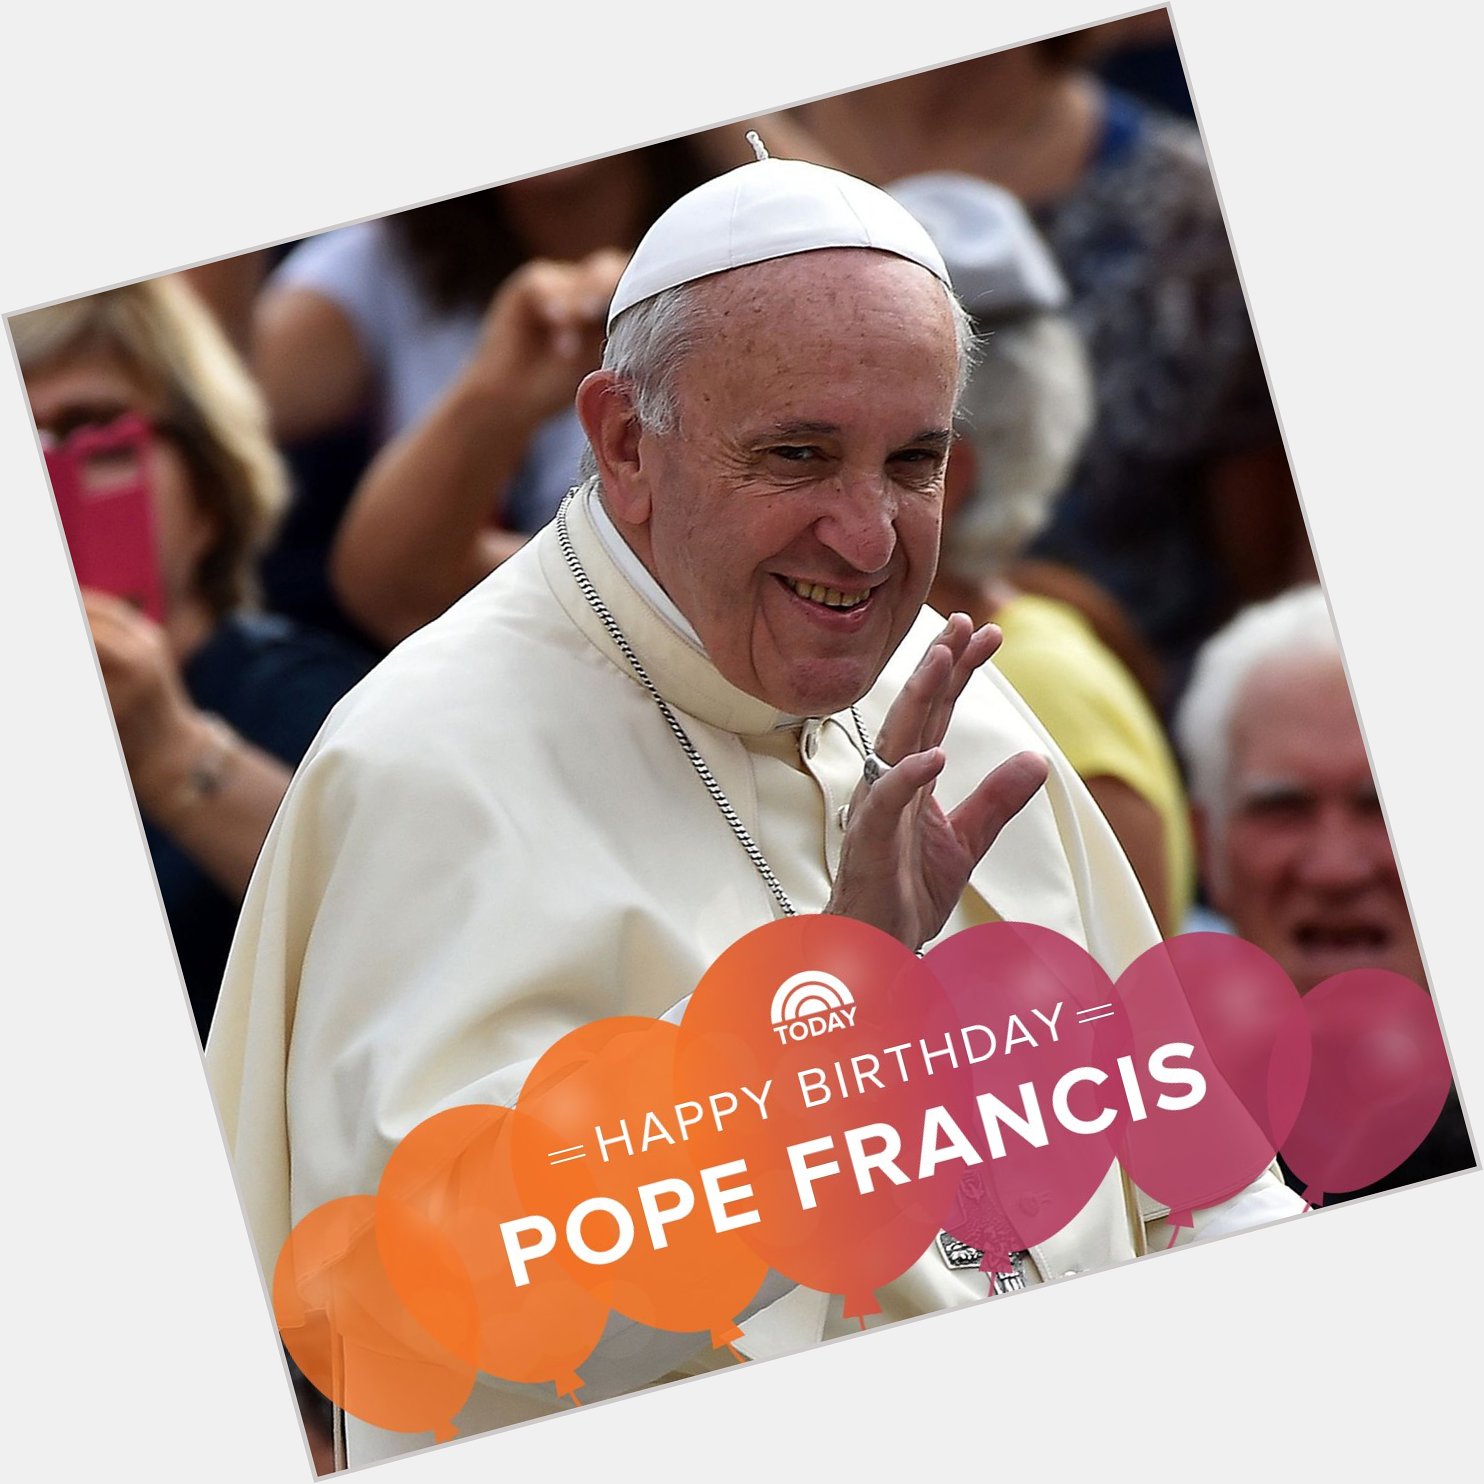 Happy birthday to His Holiness Pope Francis!  